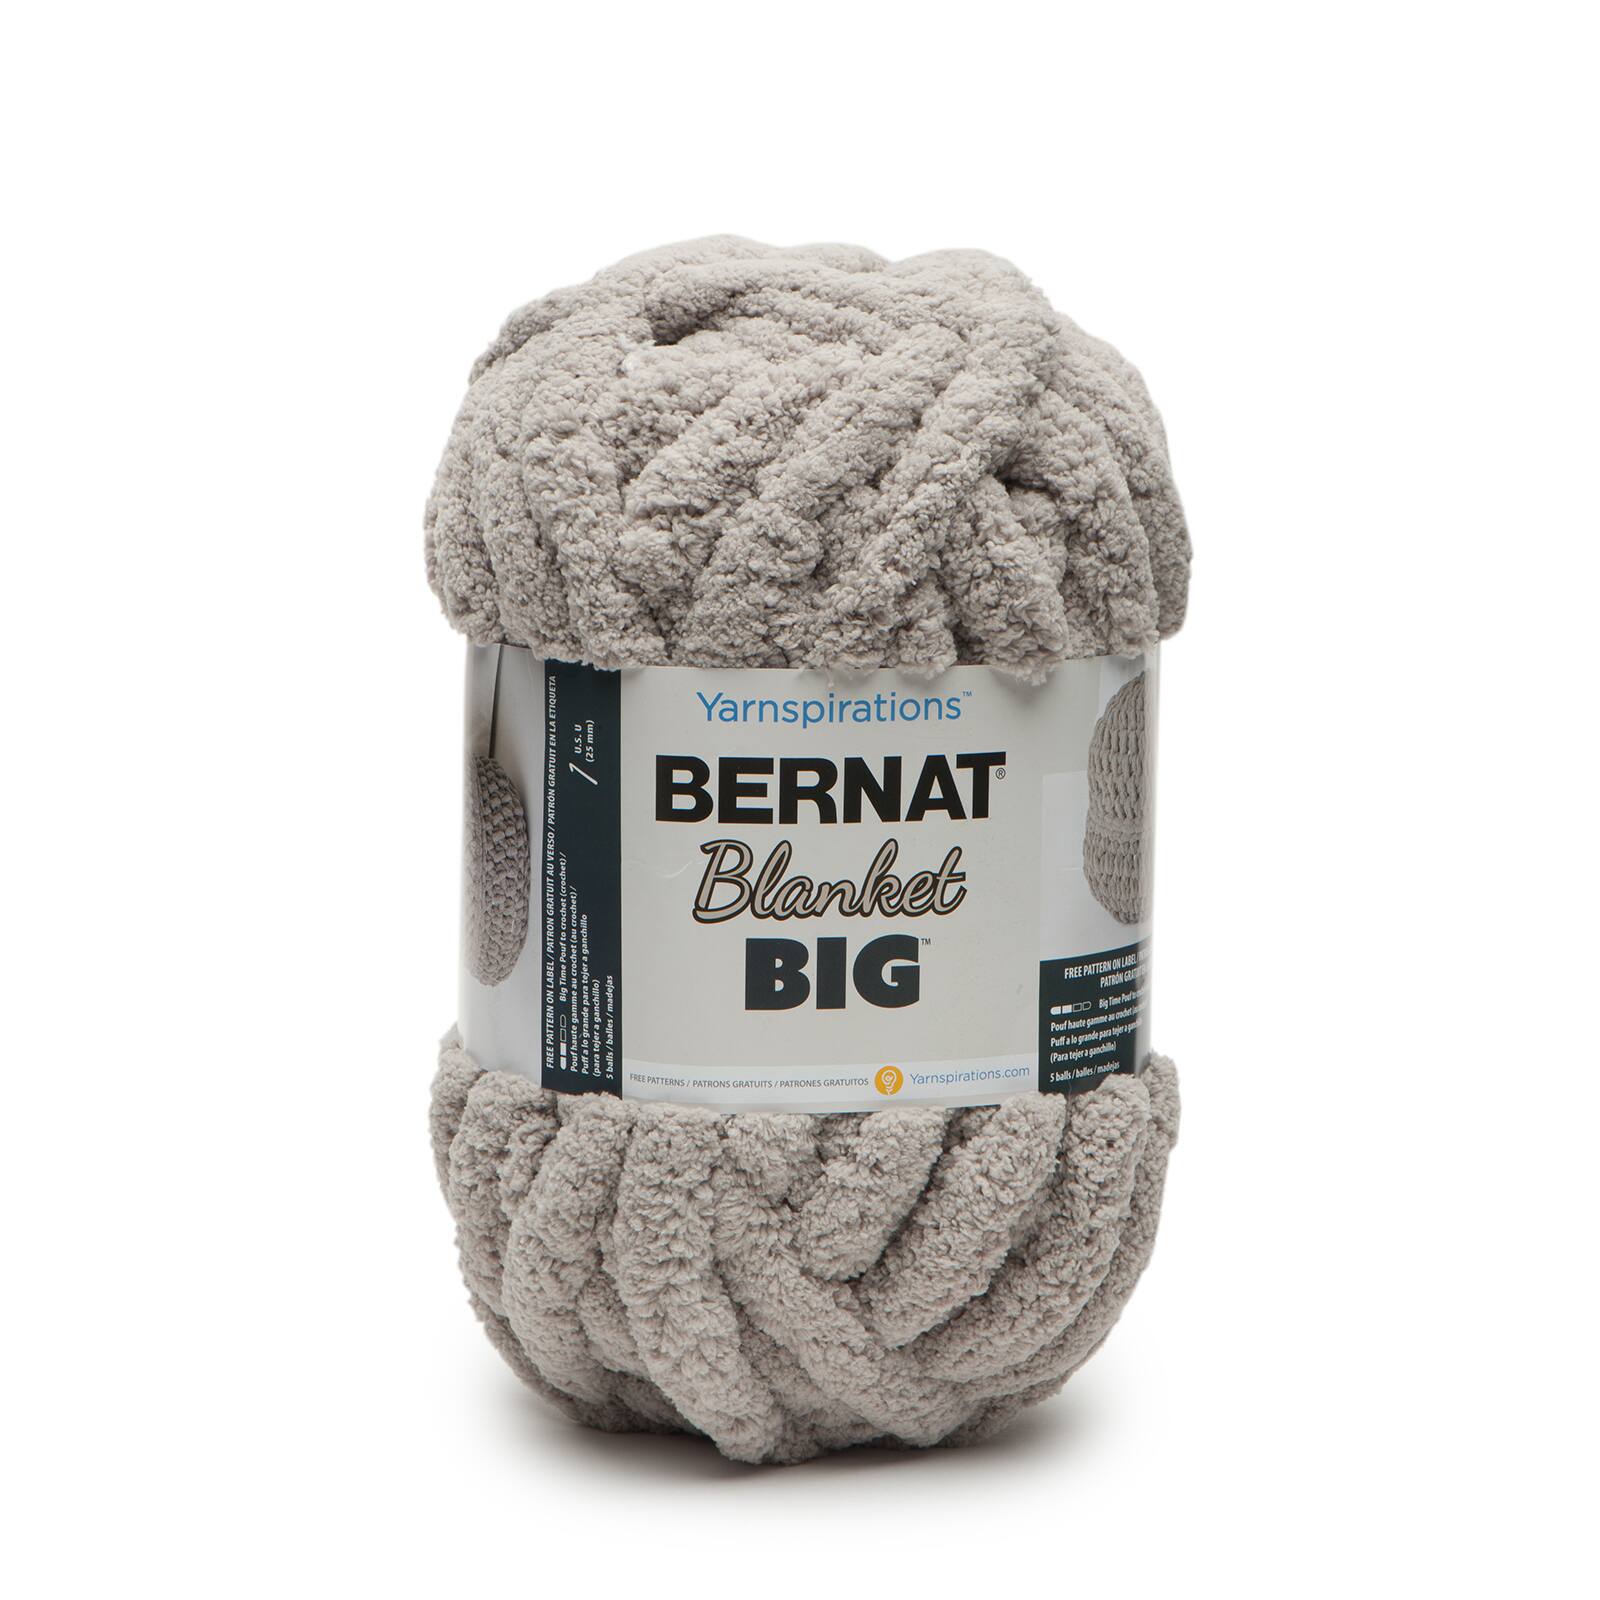 Tutorial: How to Make ~Extra Chunky~ Yarn! (Bernat Blanket Big Dupe out of  Bernat Blanket Extra) 